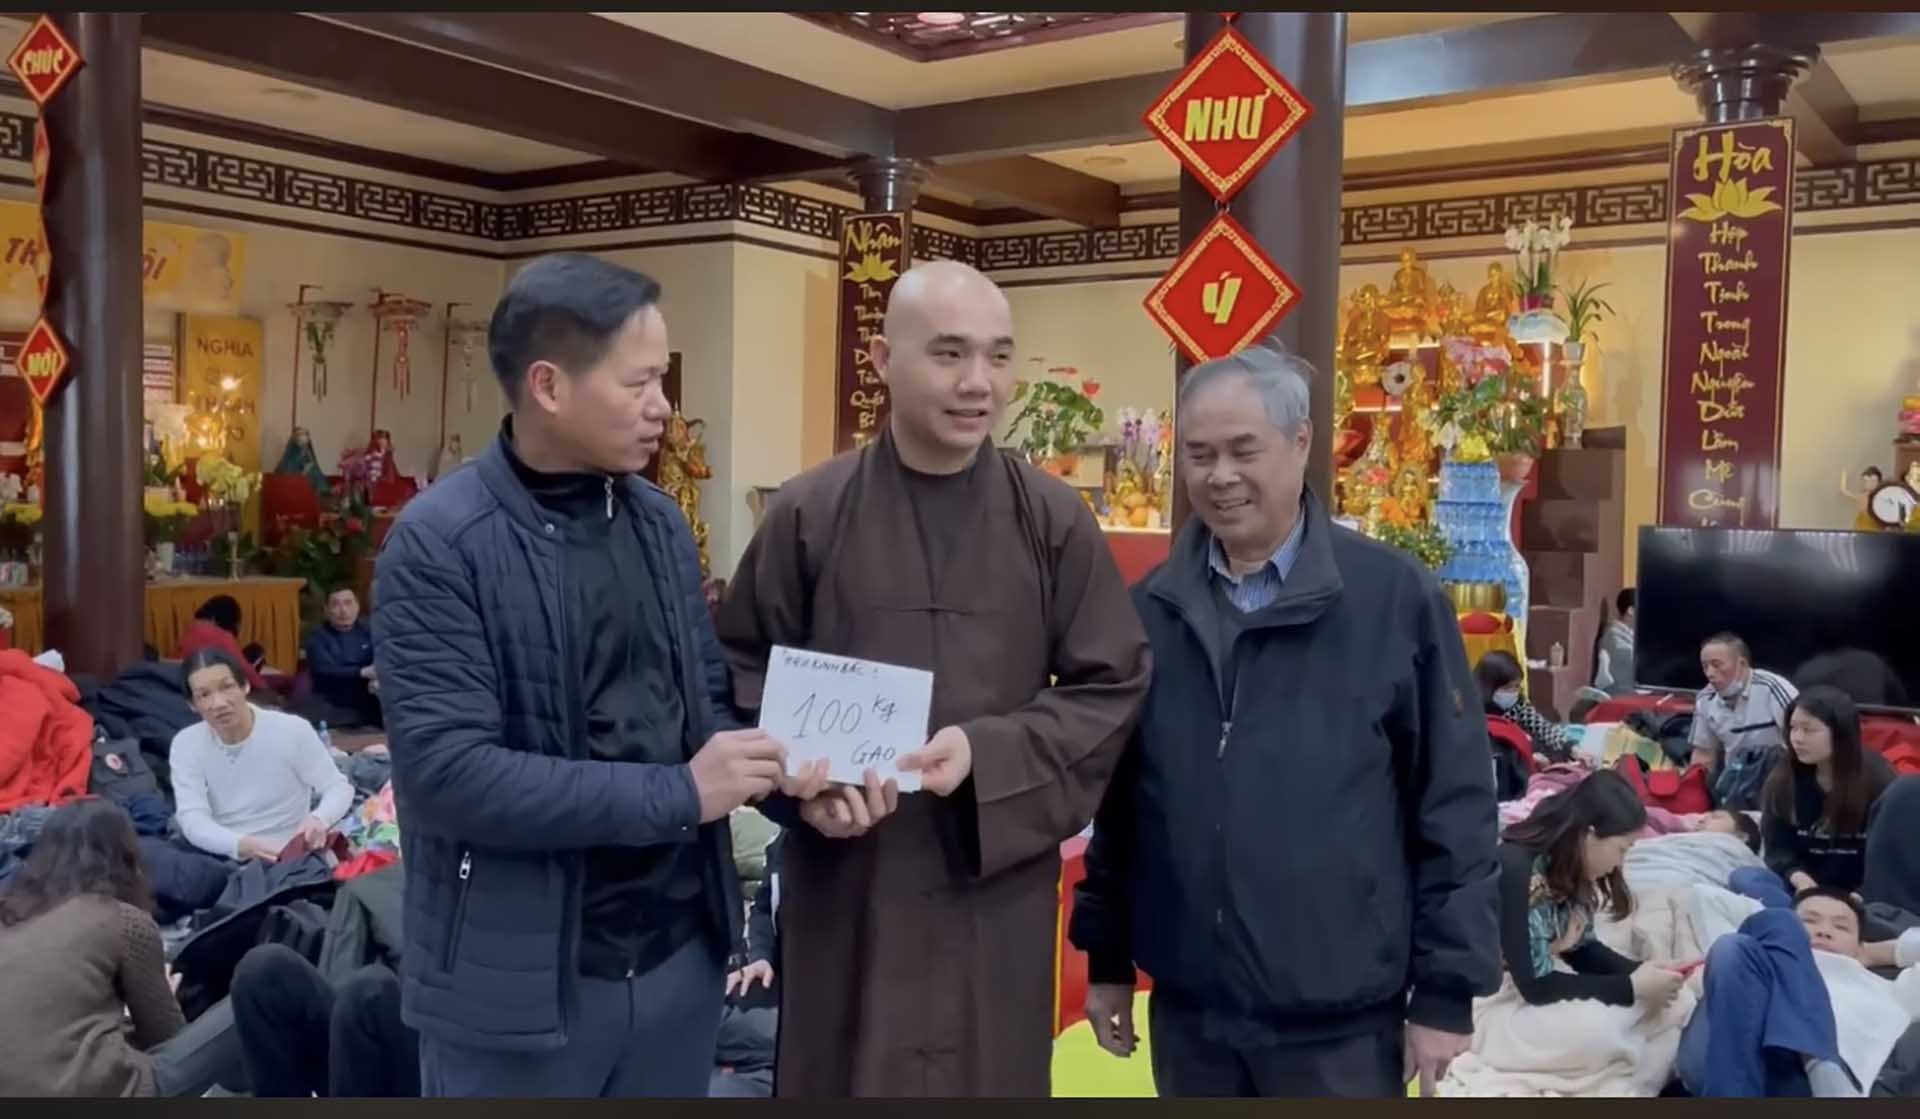 Members of the Thanh Hoa Compatriot Council in Poland came to visit and give gifts to Vietnamese refugees at Nhan Hoa Pagoda.  (Photo: Thanh Hoa Compatriot Council in Poland)